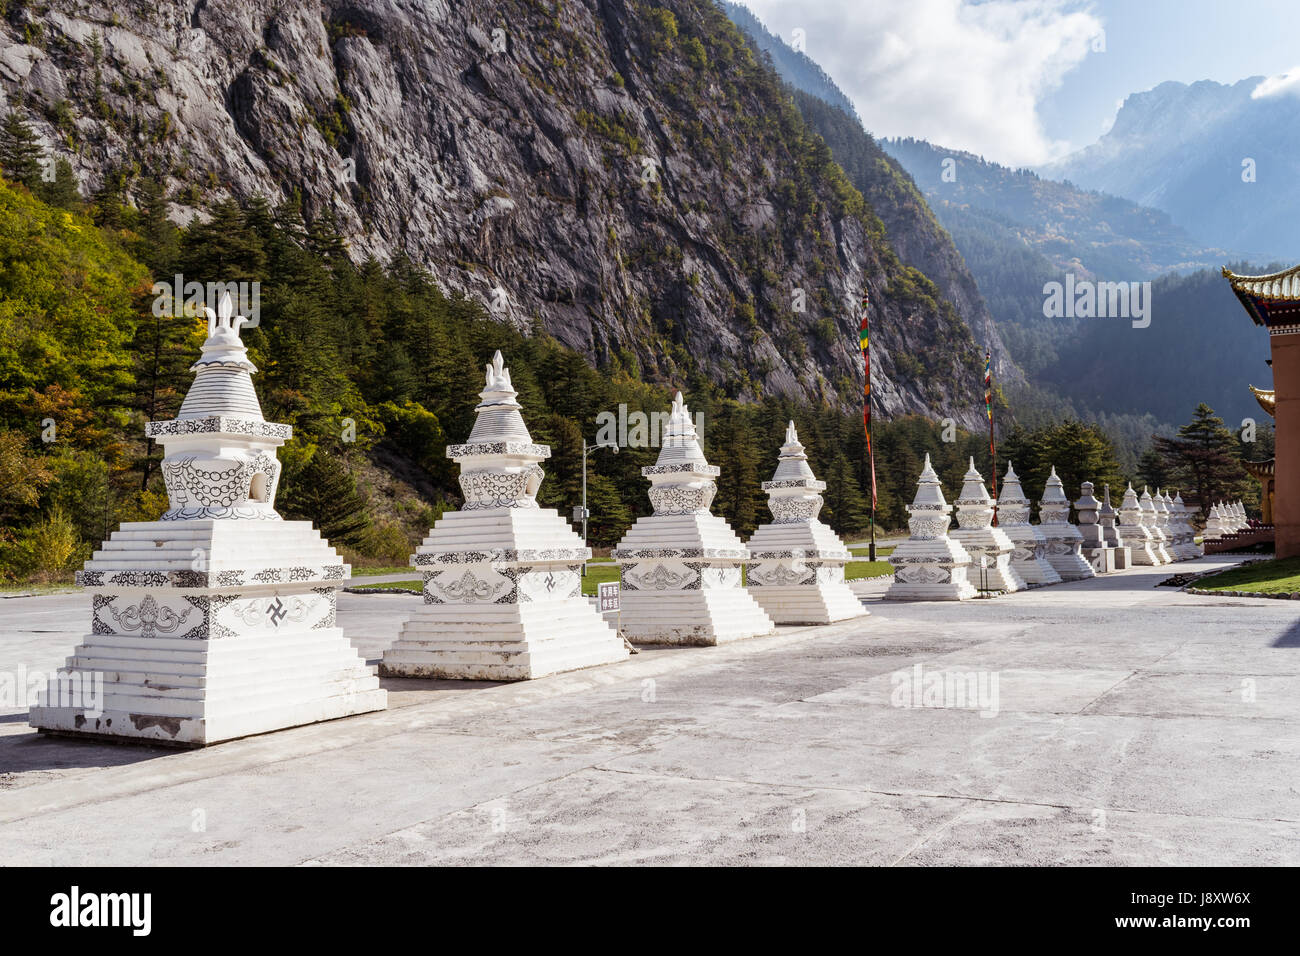 Tibetan stupa architecture (stupas) in a row, mountains background in Jiuzhai Valley, Sichuan province, China Stock Photo